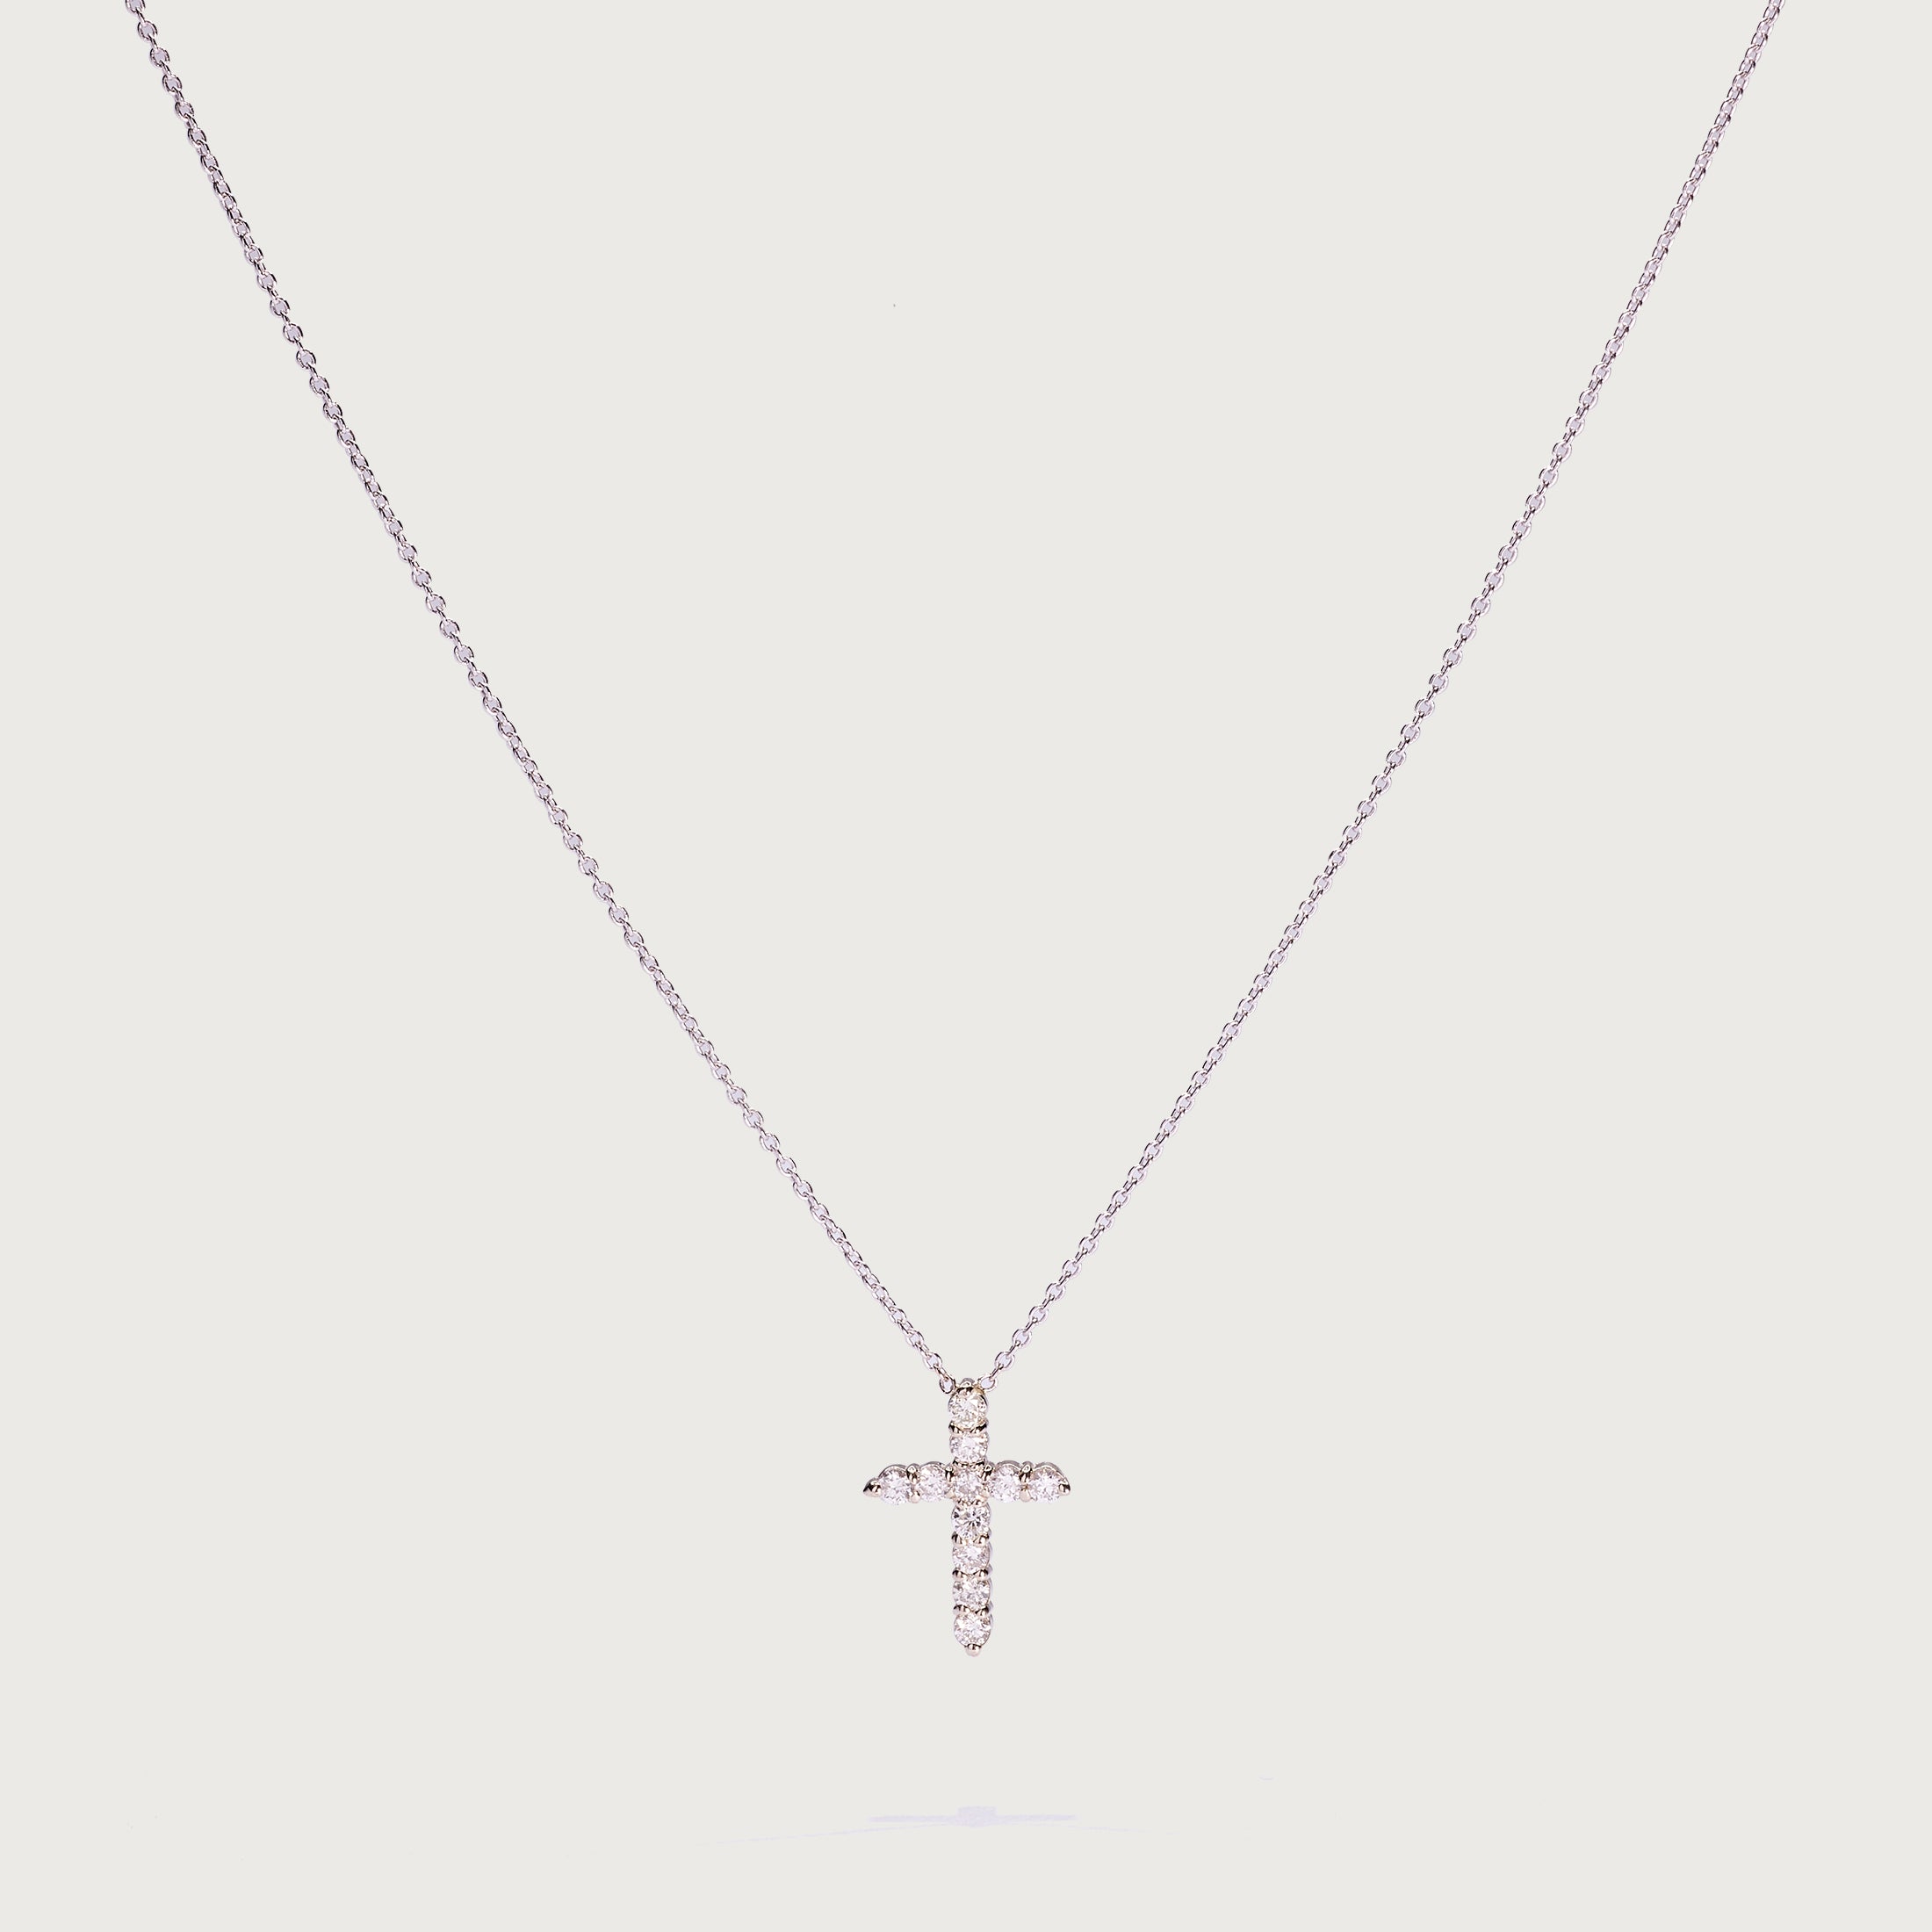 YELLOW GOLD CROSS PENDANT NECKLACE WITH DIAMONDS, .15 CT TW - Howard's  Jewelry Center